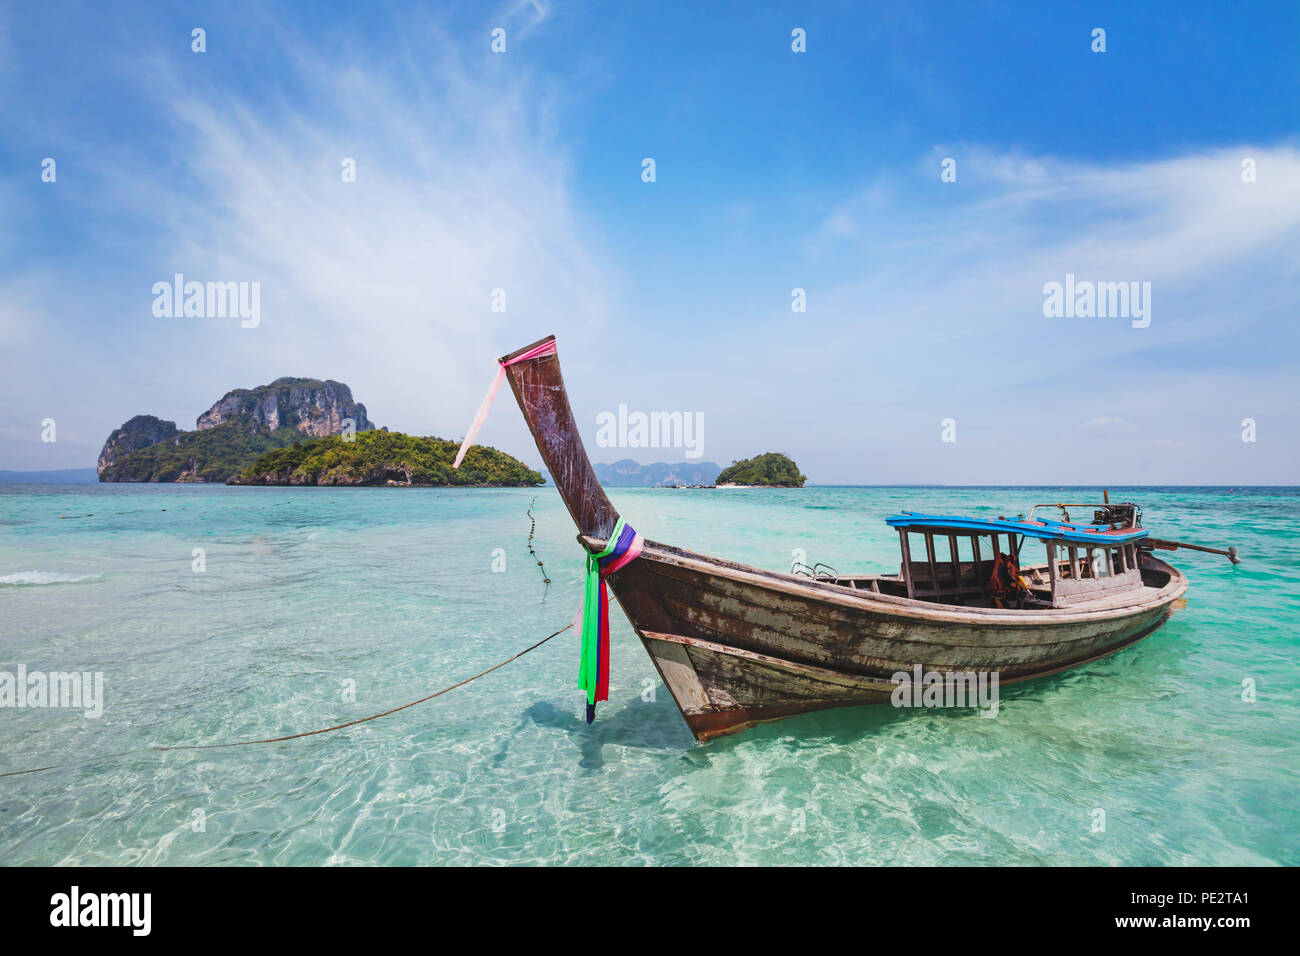 beautiful island beach landscape in Thailand between Krabi and Phuket, travel by traditional wooden longtail boat in paradise turquoise water Stock Photo